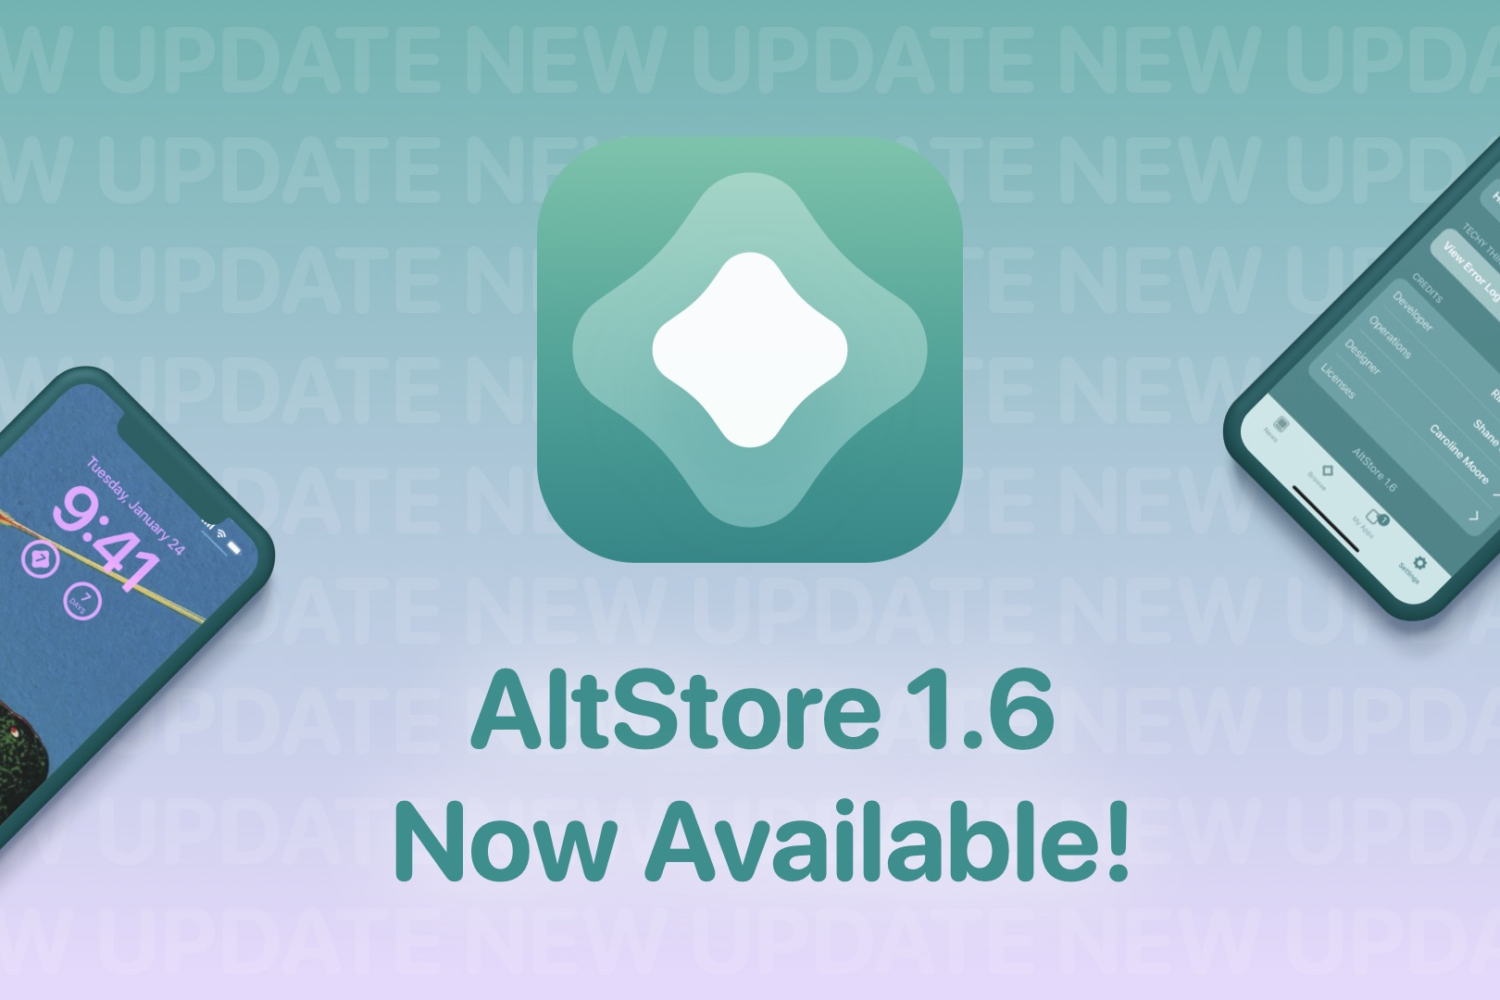 AltStore version 1.6 now available.